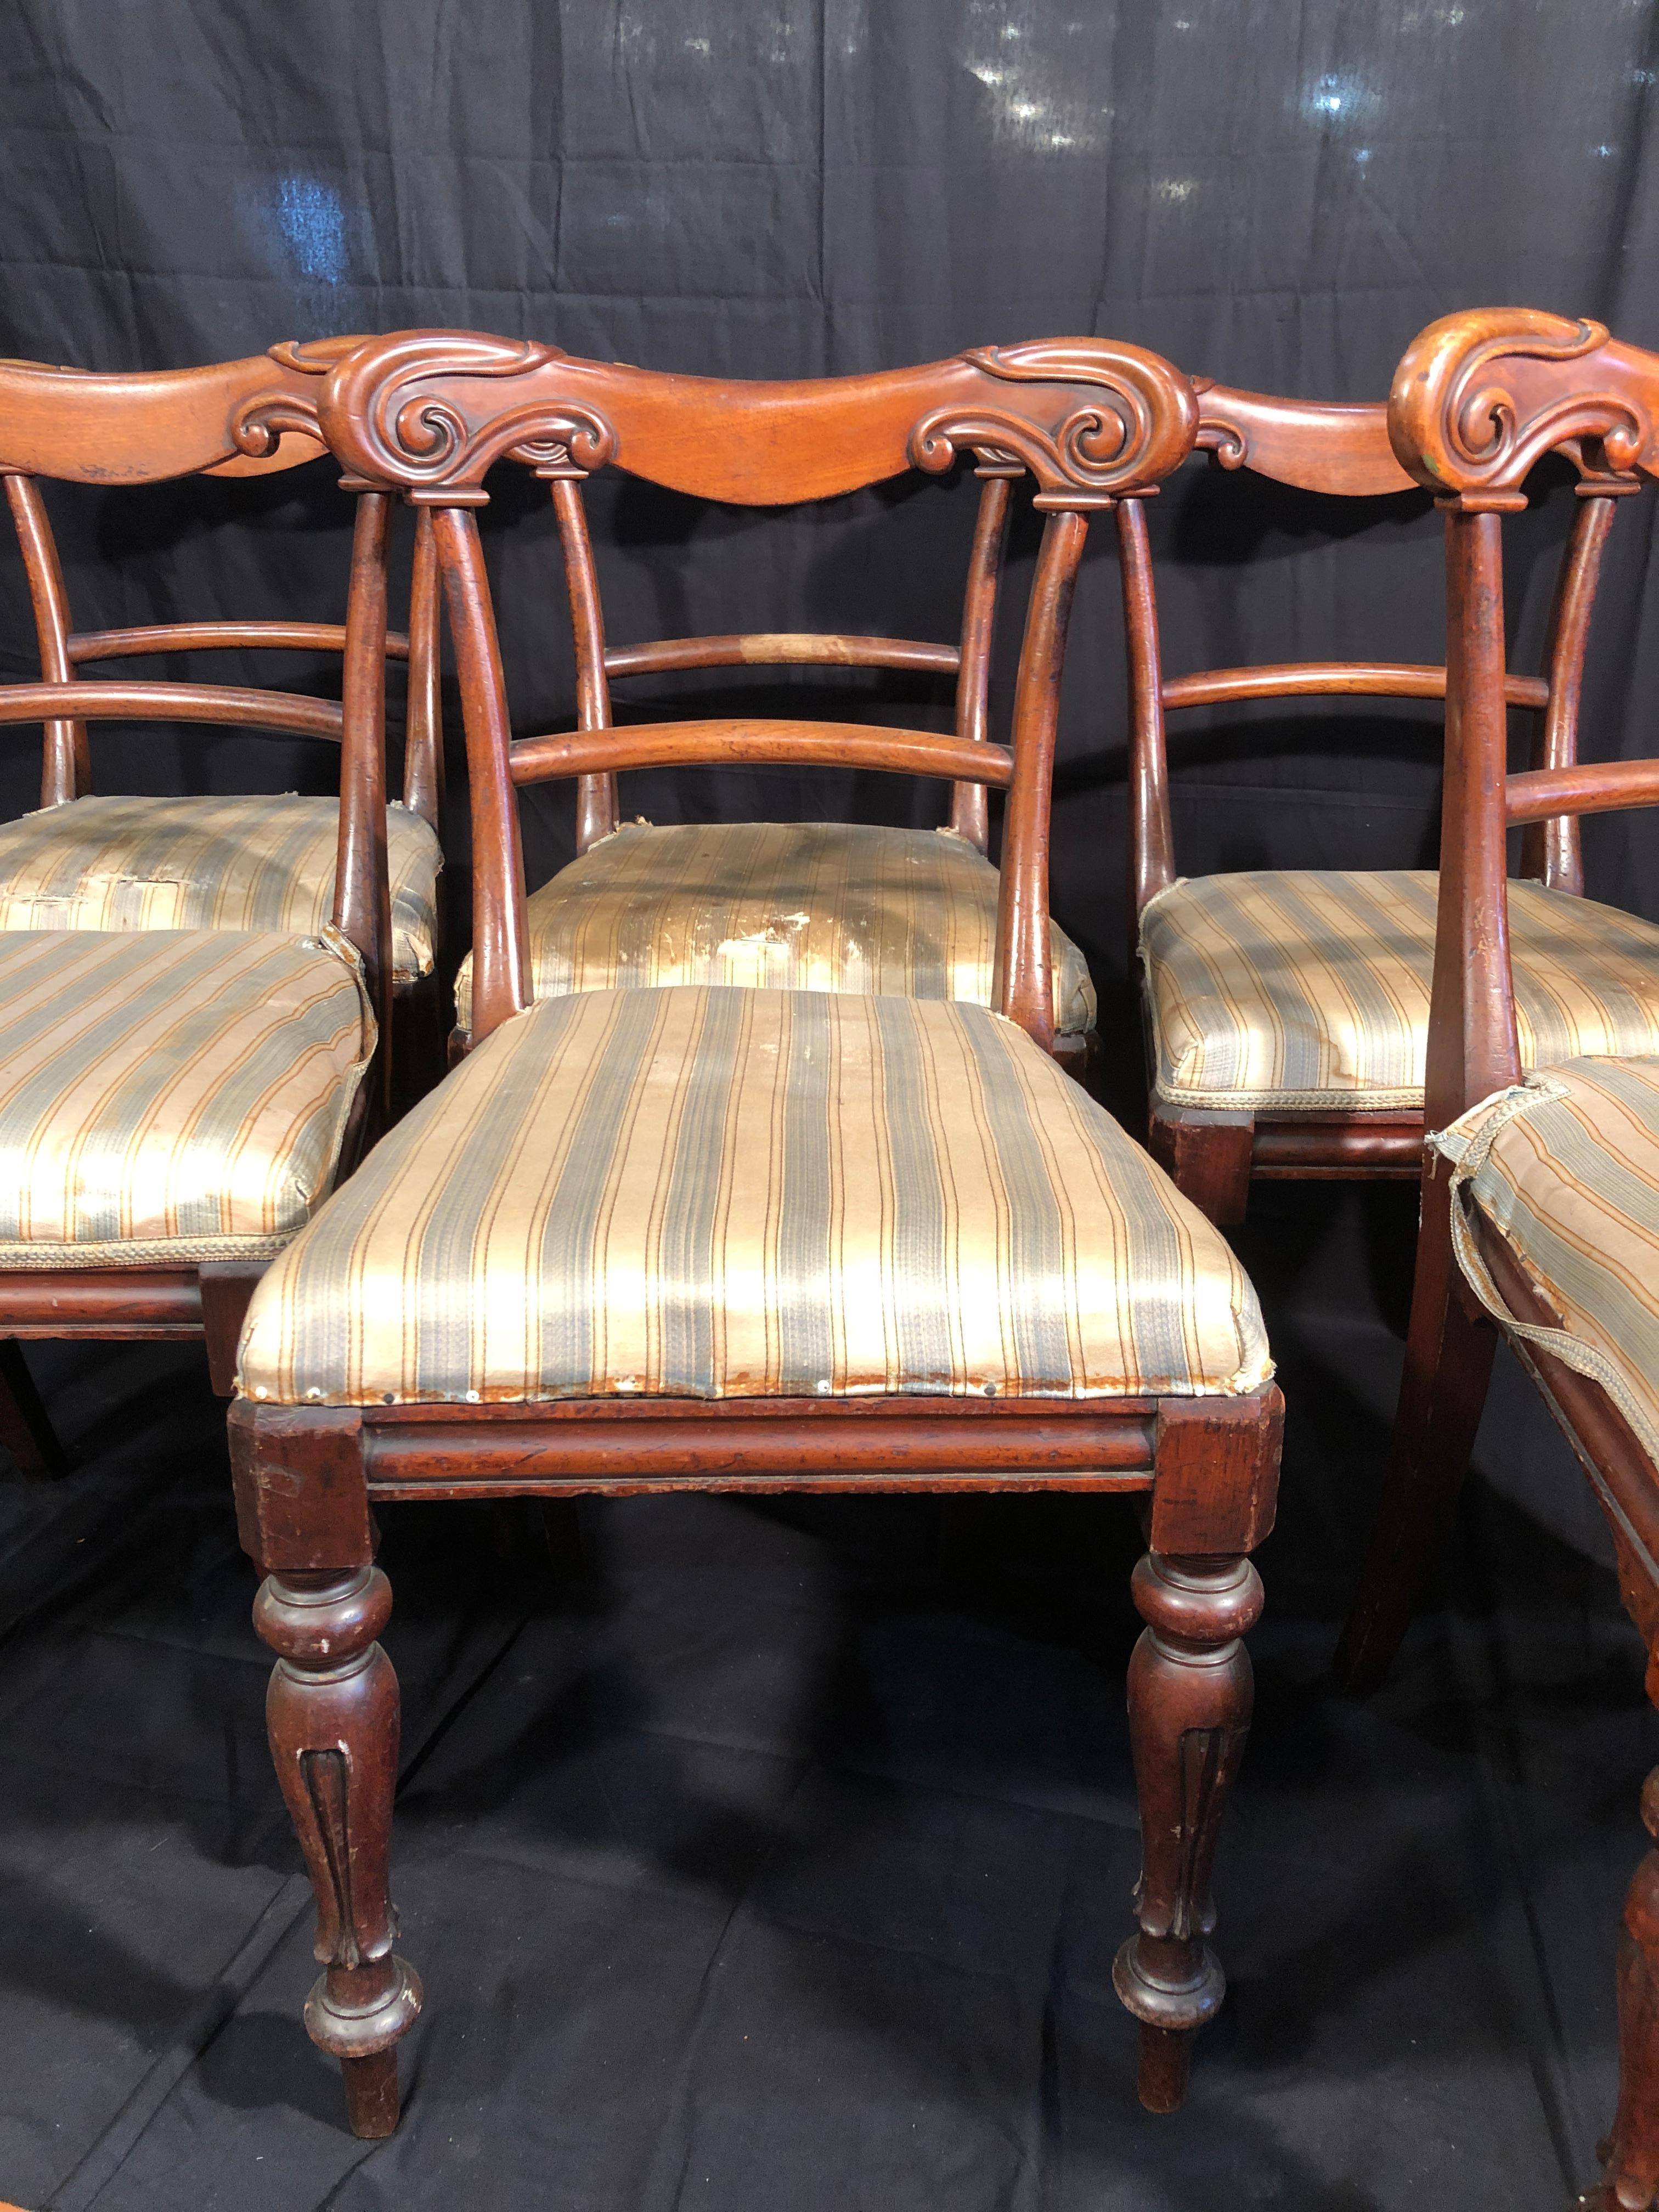 Six English chairs in mahogany, carved on the back, Regency period, circa 1830, tulip leg, in good condition, lack of wood in some parts.